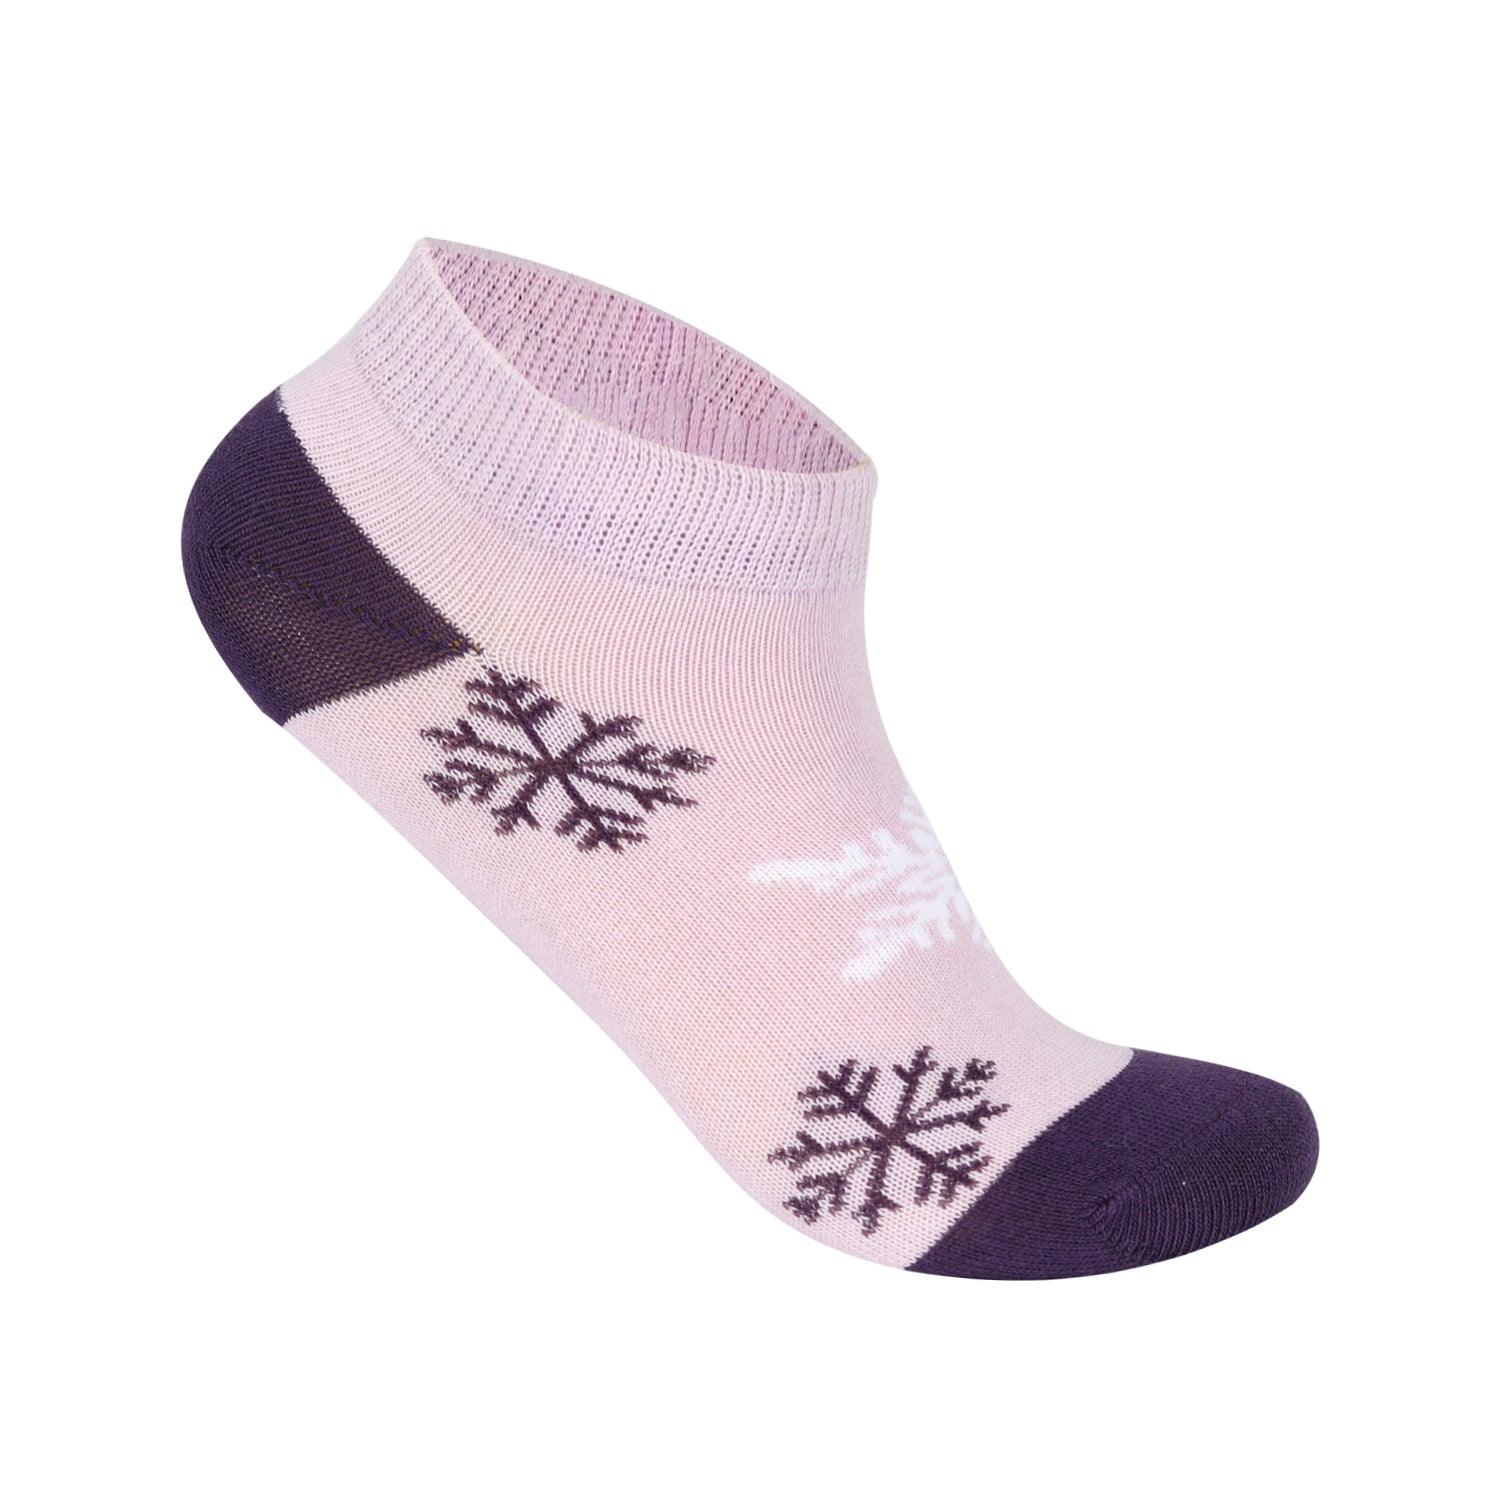 ACTIV KIDS PACK ANKEL SOCKS *3 - pink*l.purple*yellow A-215 Activ Abou Alaa